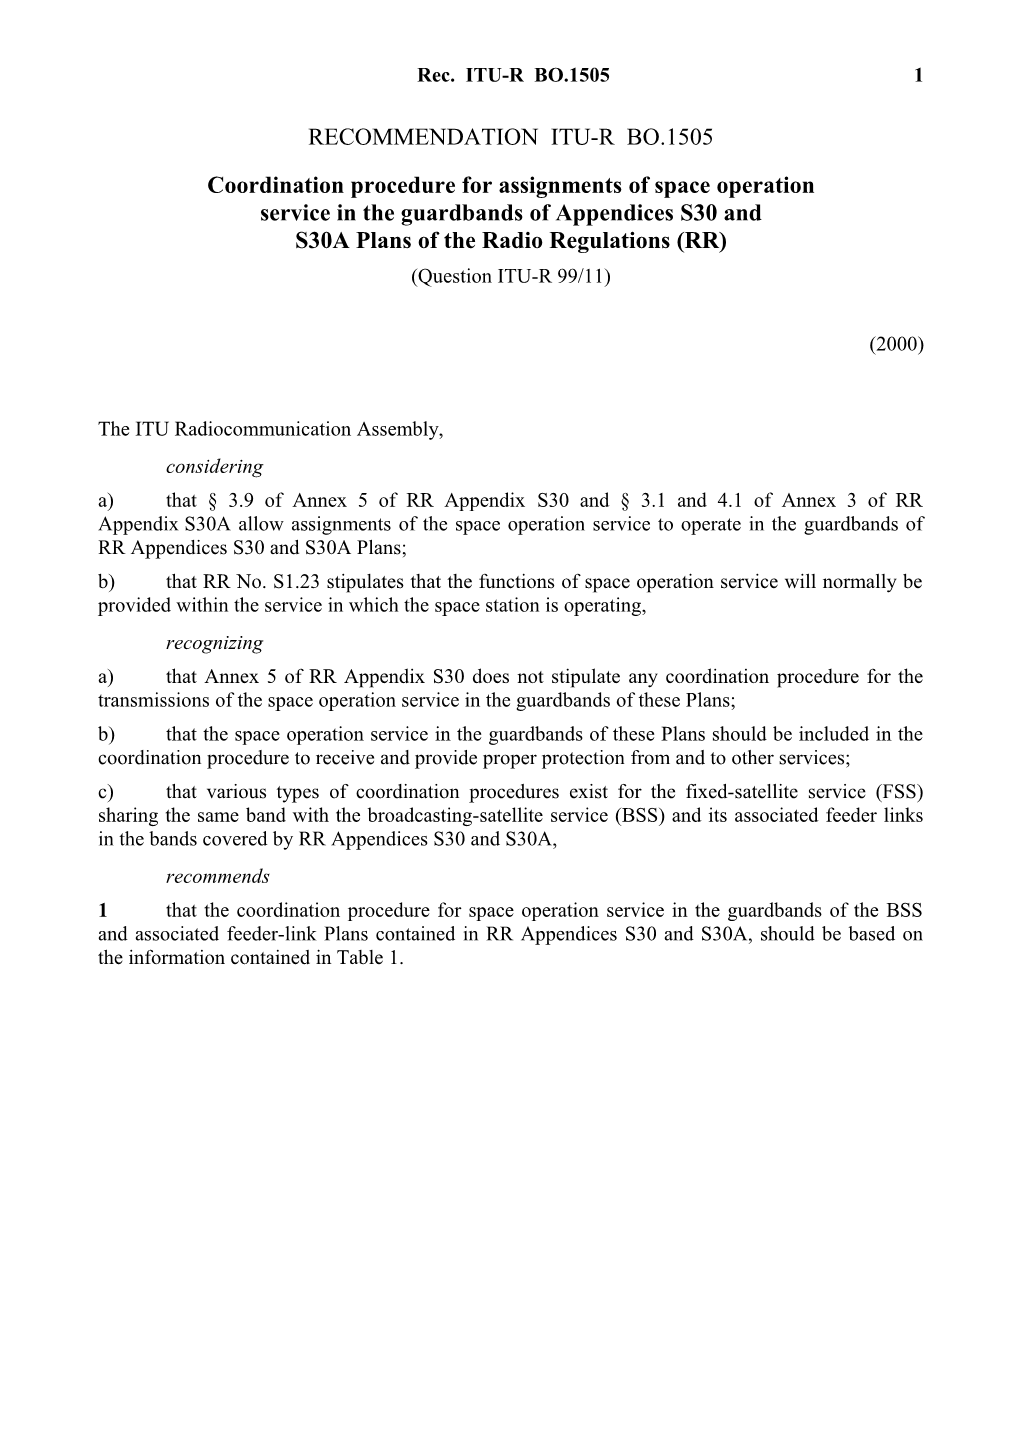 RECOMMENDATION ITU-R BO.1505 - Coordination Procedure for Assignments of Space Operation